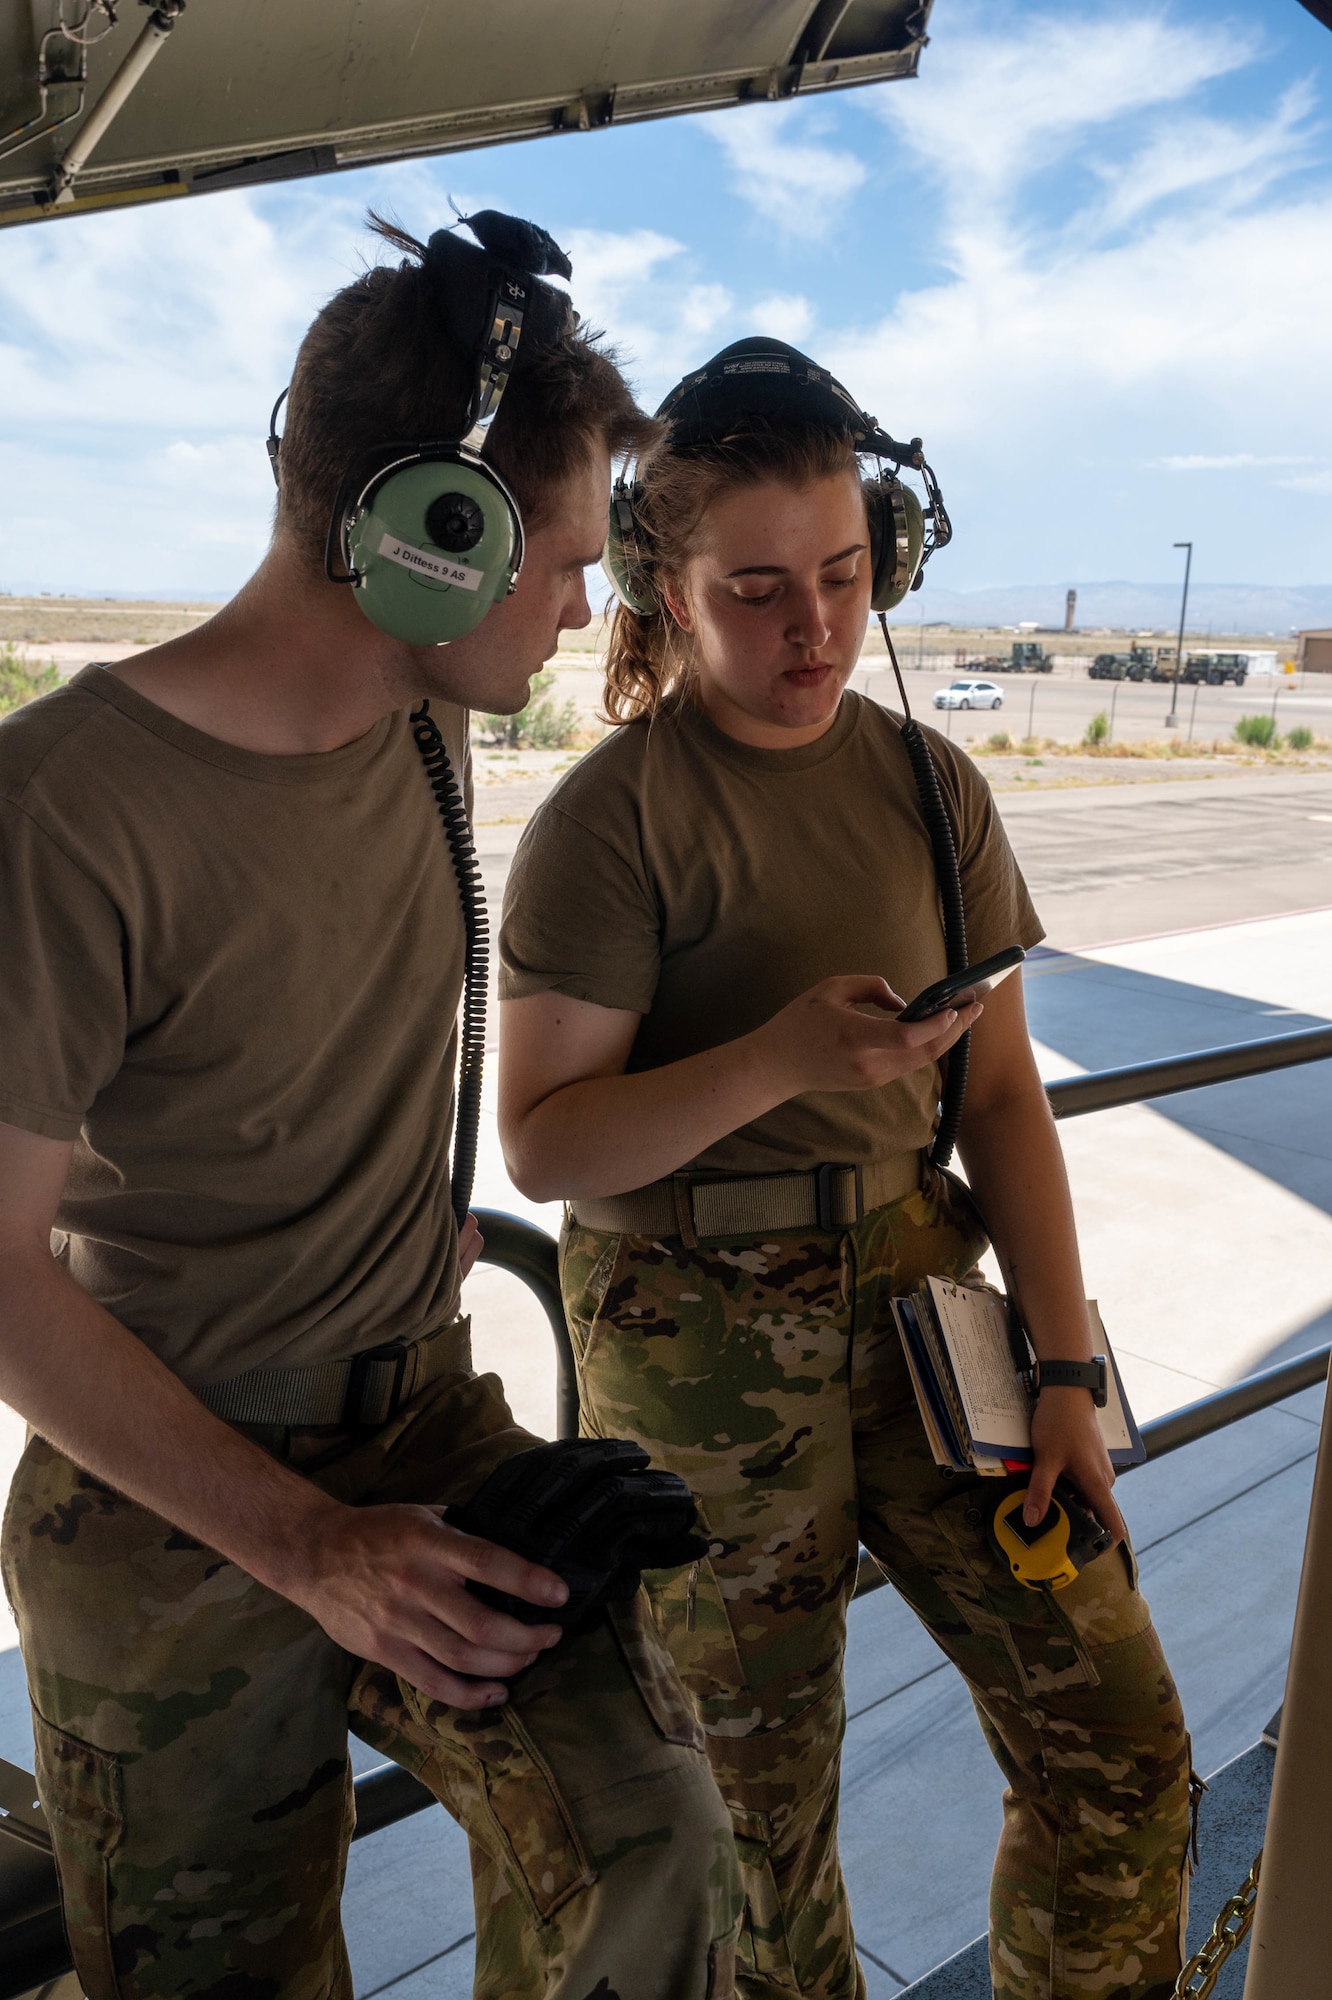 Staff Sgt. John Dittess, left, and Senior Airman Amelia Bradfield, both 9th Airlift Squadron loadmasters, calculate the weight of palletized cargo before loading it onto a Dover Air Force Base C-5M Super Galaxy during a Major Command Service Tail Trainer exercise at Holloman AFB, New Mexico, June 2, 2021.The 9th AS performs MSTTs to expedite upgrade and qualification training for C-5M loadmasters and flight engineers. Over the course of the 10-day MSTT, 9th AS loadmasters loaded and unloaded 320,085 pounds of cargo, including palletized cargo, aircraft ground equipment, a fuel truck and a K-loader. (U.S. Air Force photo by Senior Airman Faith Schaefer)